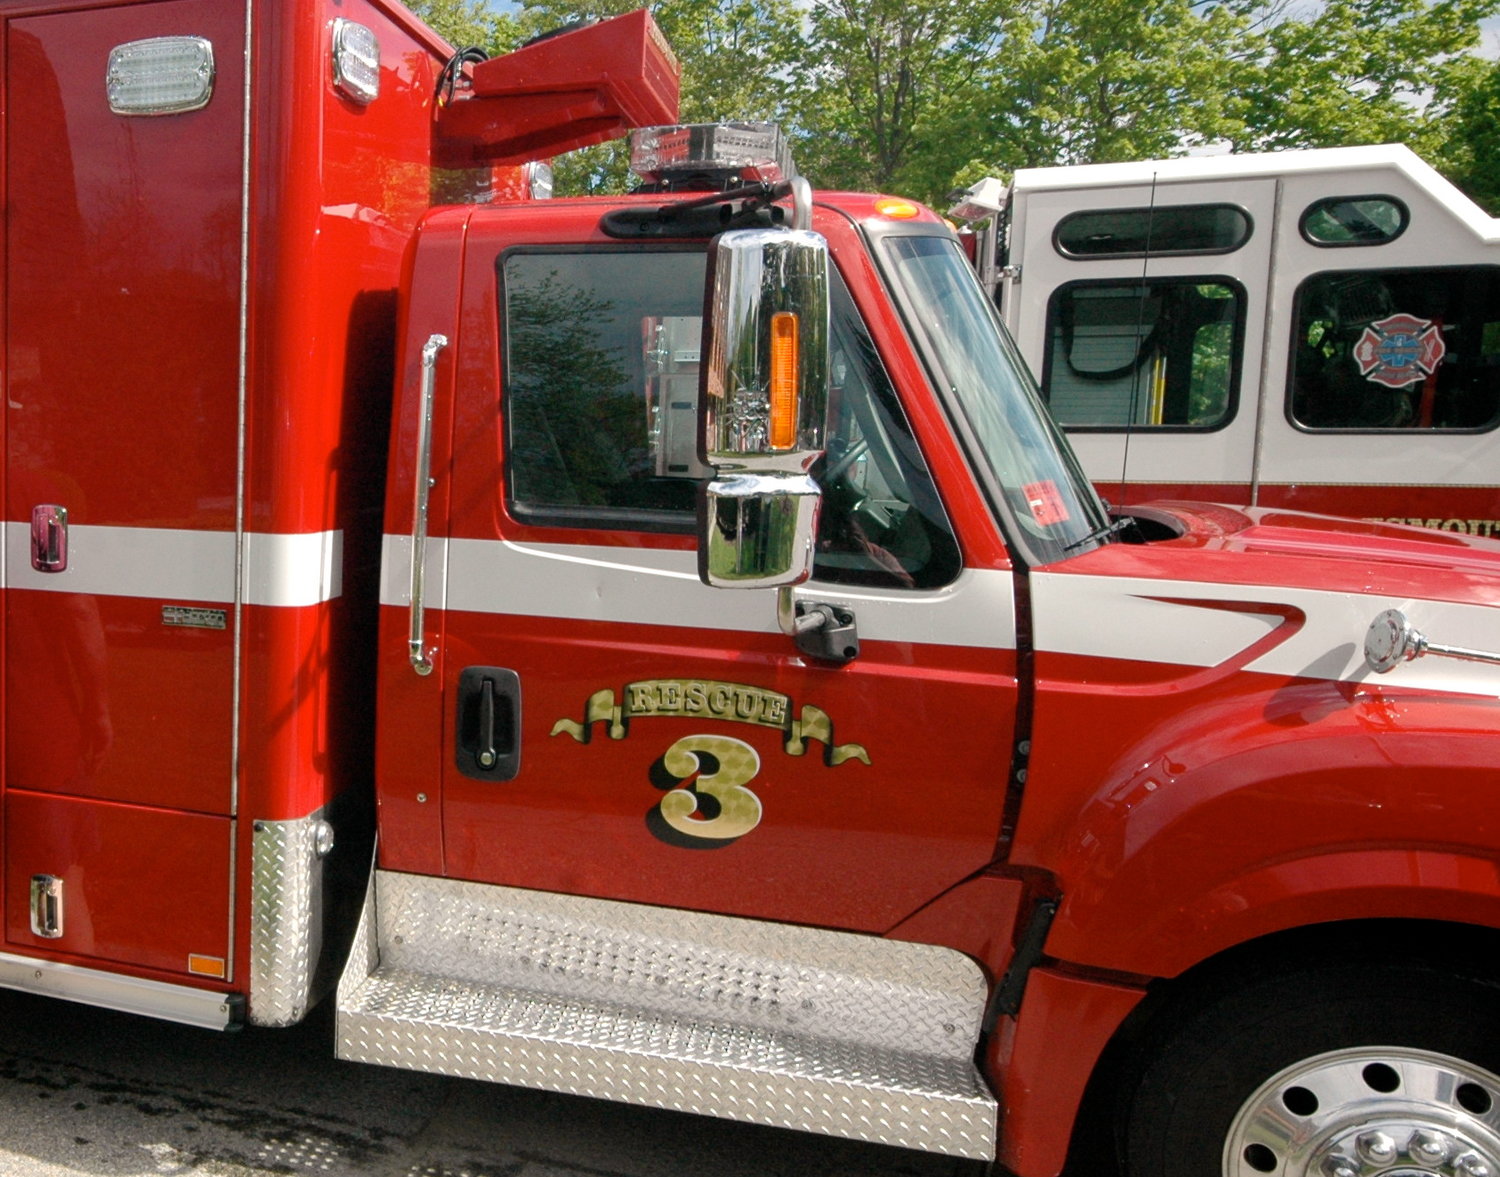 The Town of Portsmouth plans to use $1.5 million in American Rescue Plan Act (ARPA) funds to create a “self-sustaining” capital improvement program for emergency vehicle apparatus.